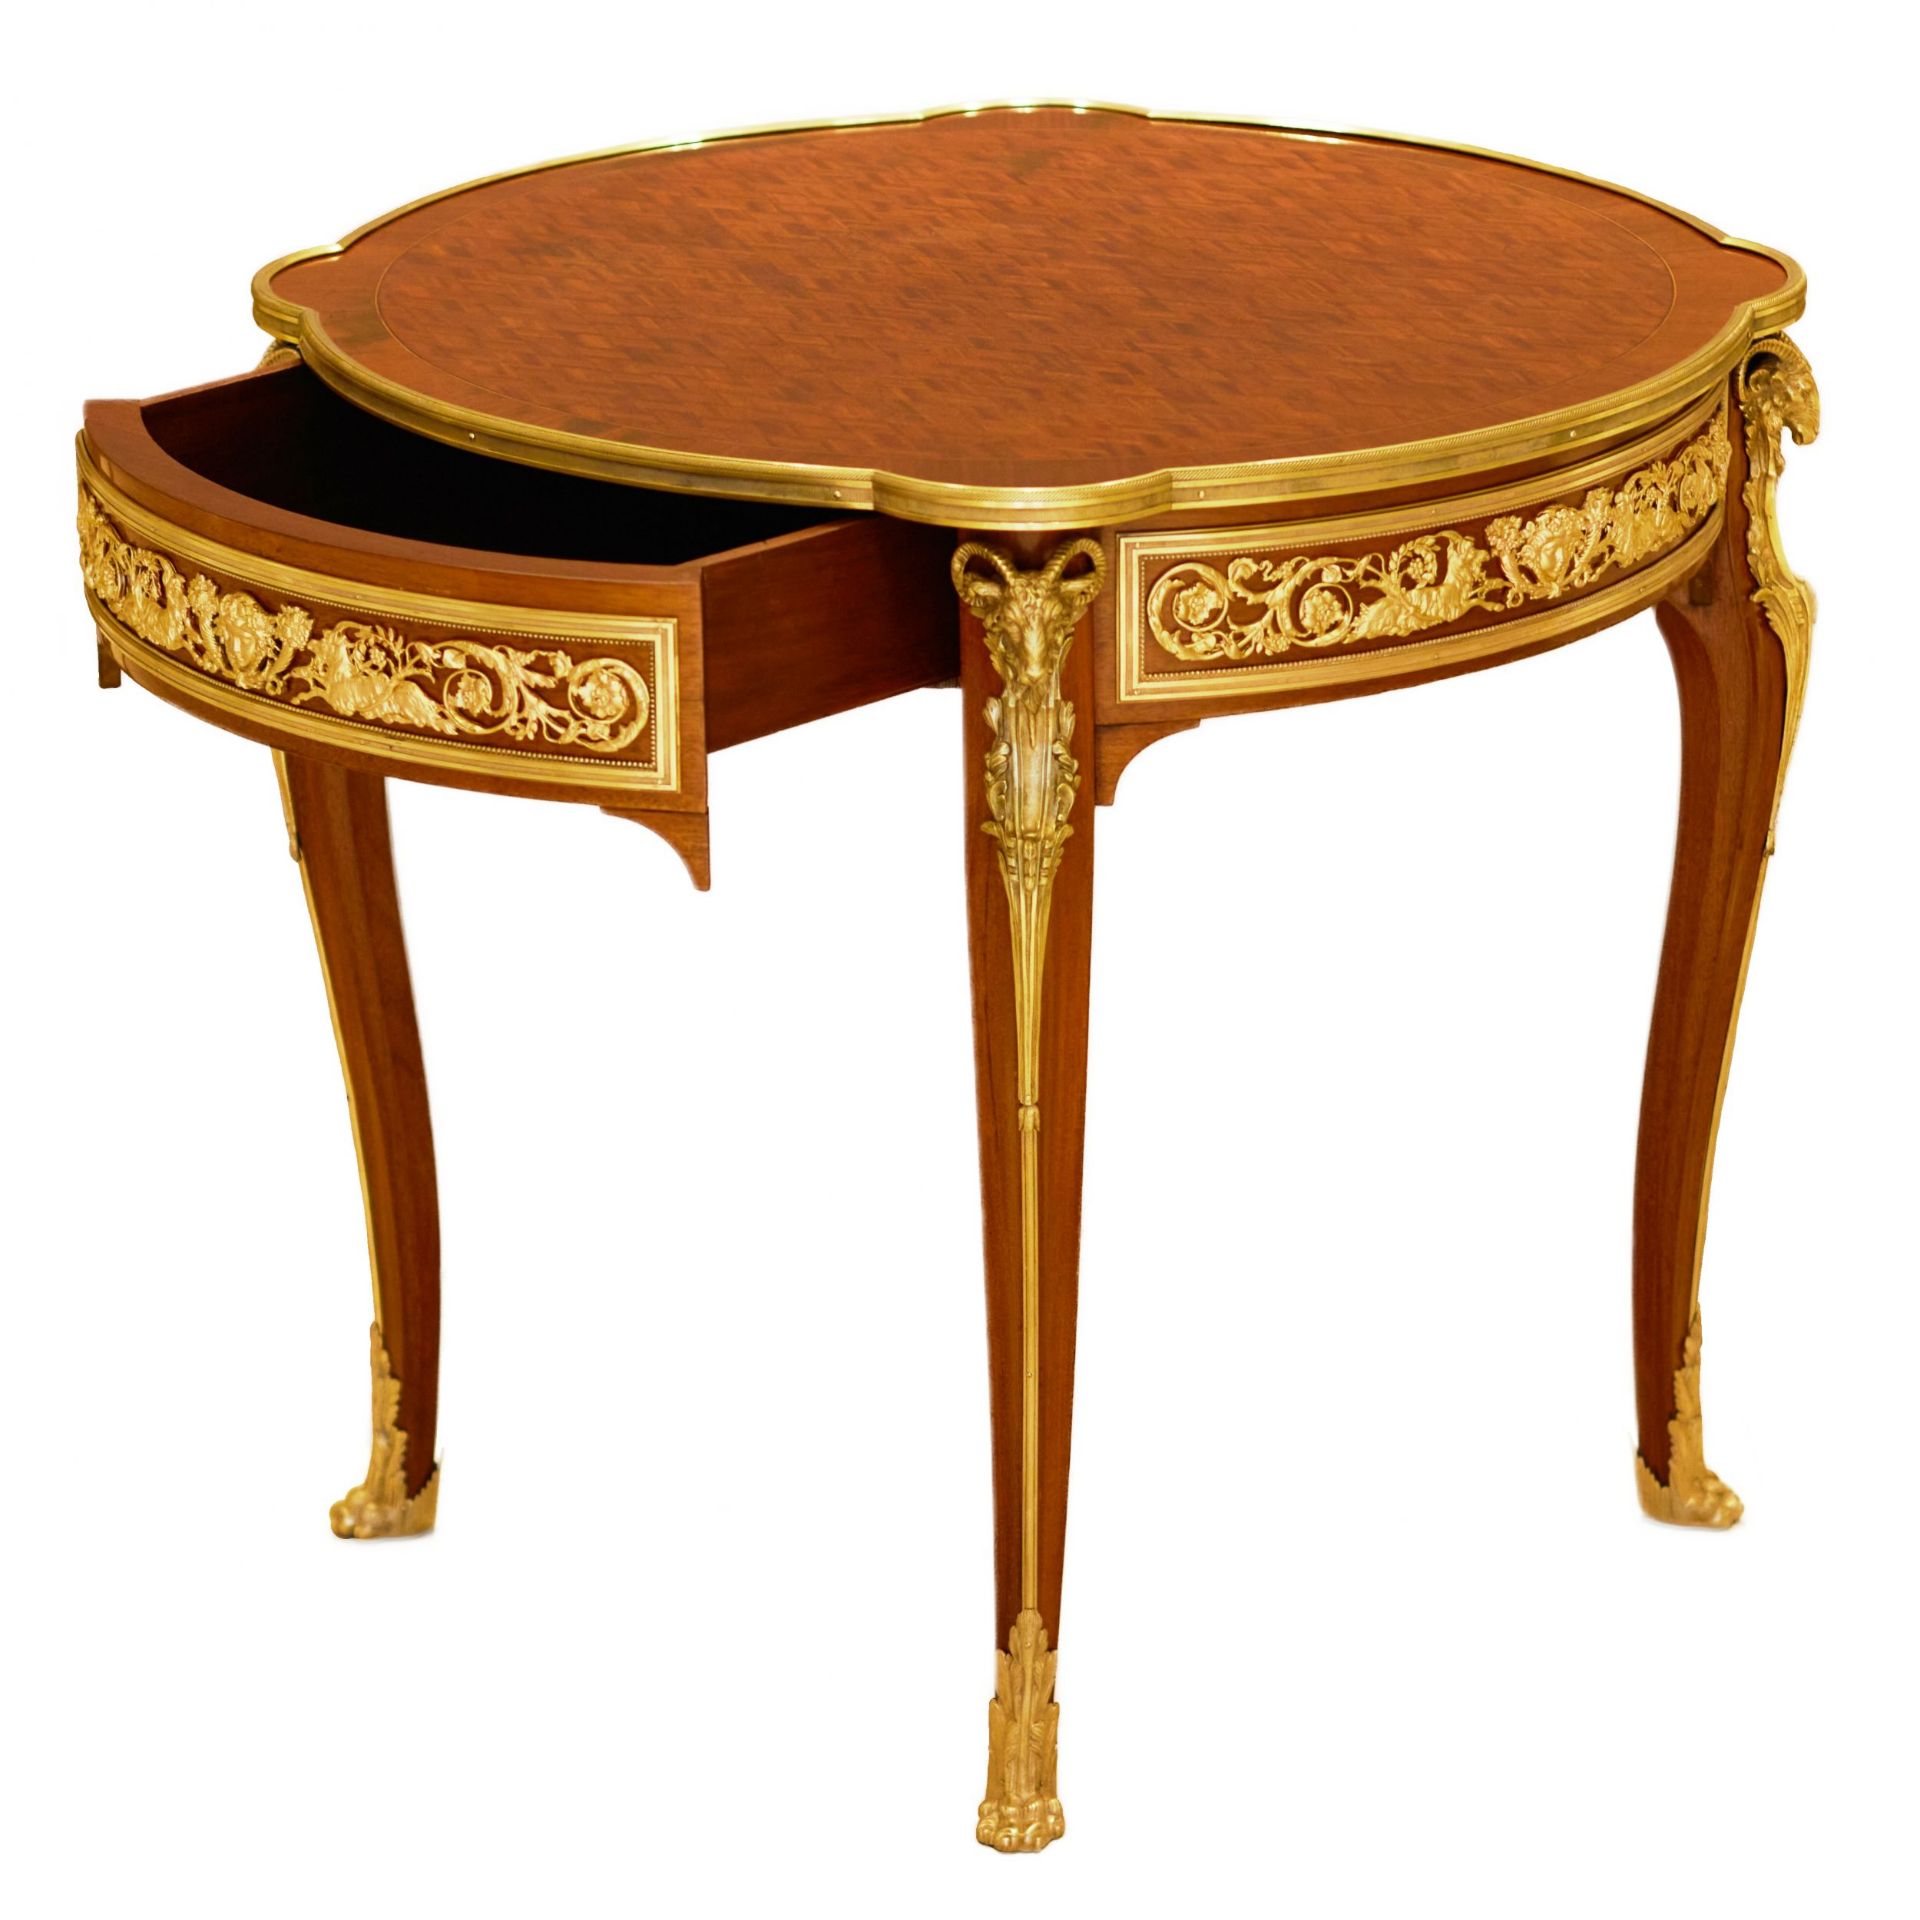 Mahogany table decorated with marquetry in the style of Louis XV, Francois Linke. Late 19th century - Bild 3 aus 6